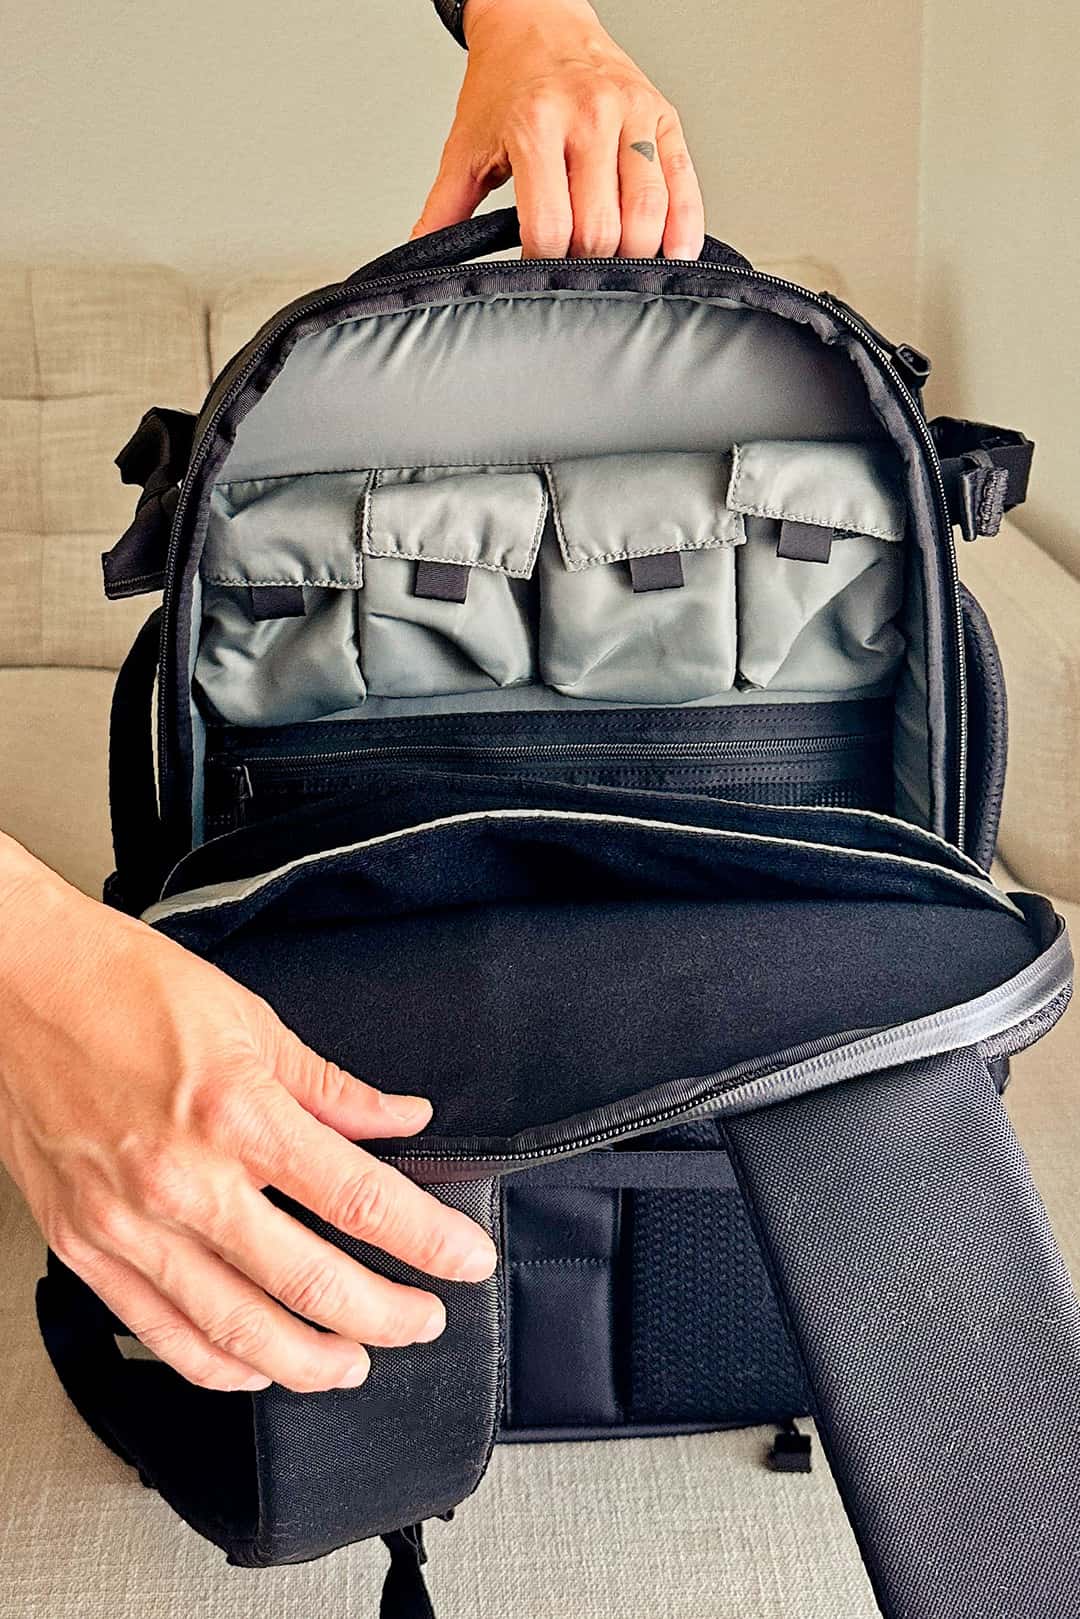 best personal item backpack